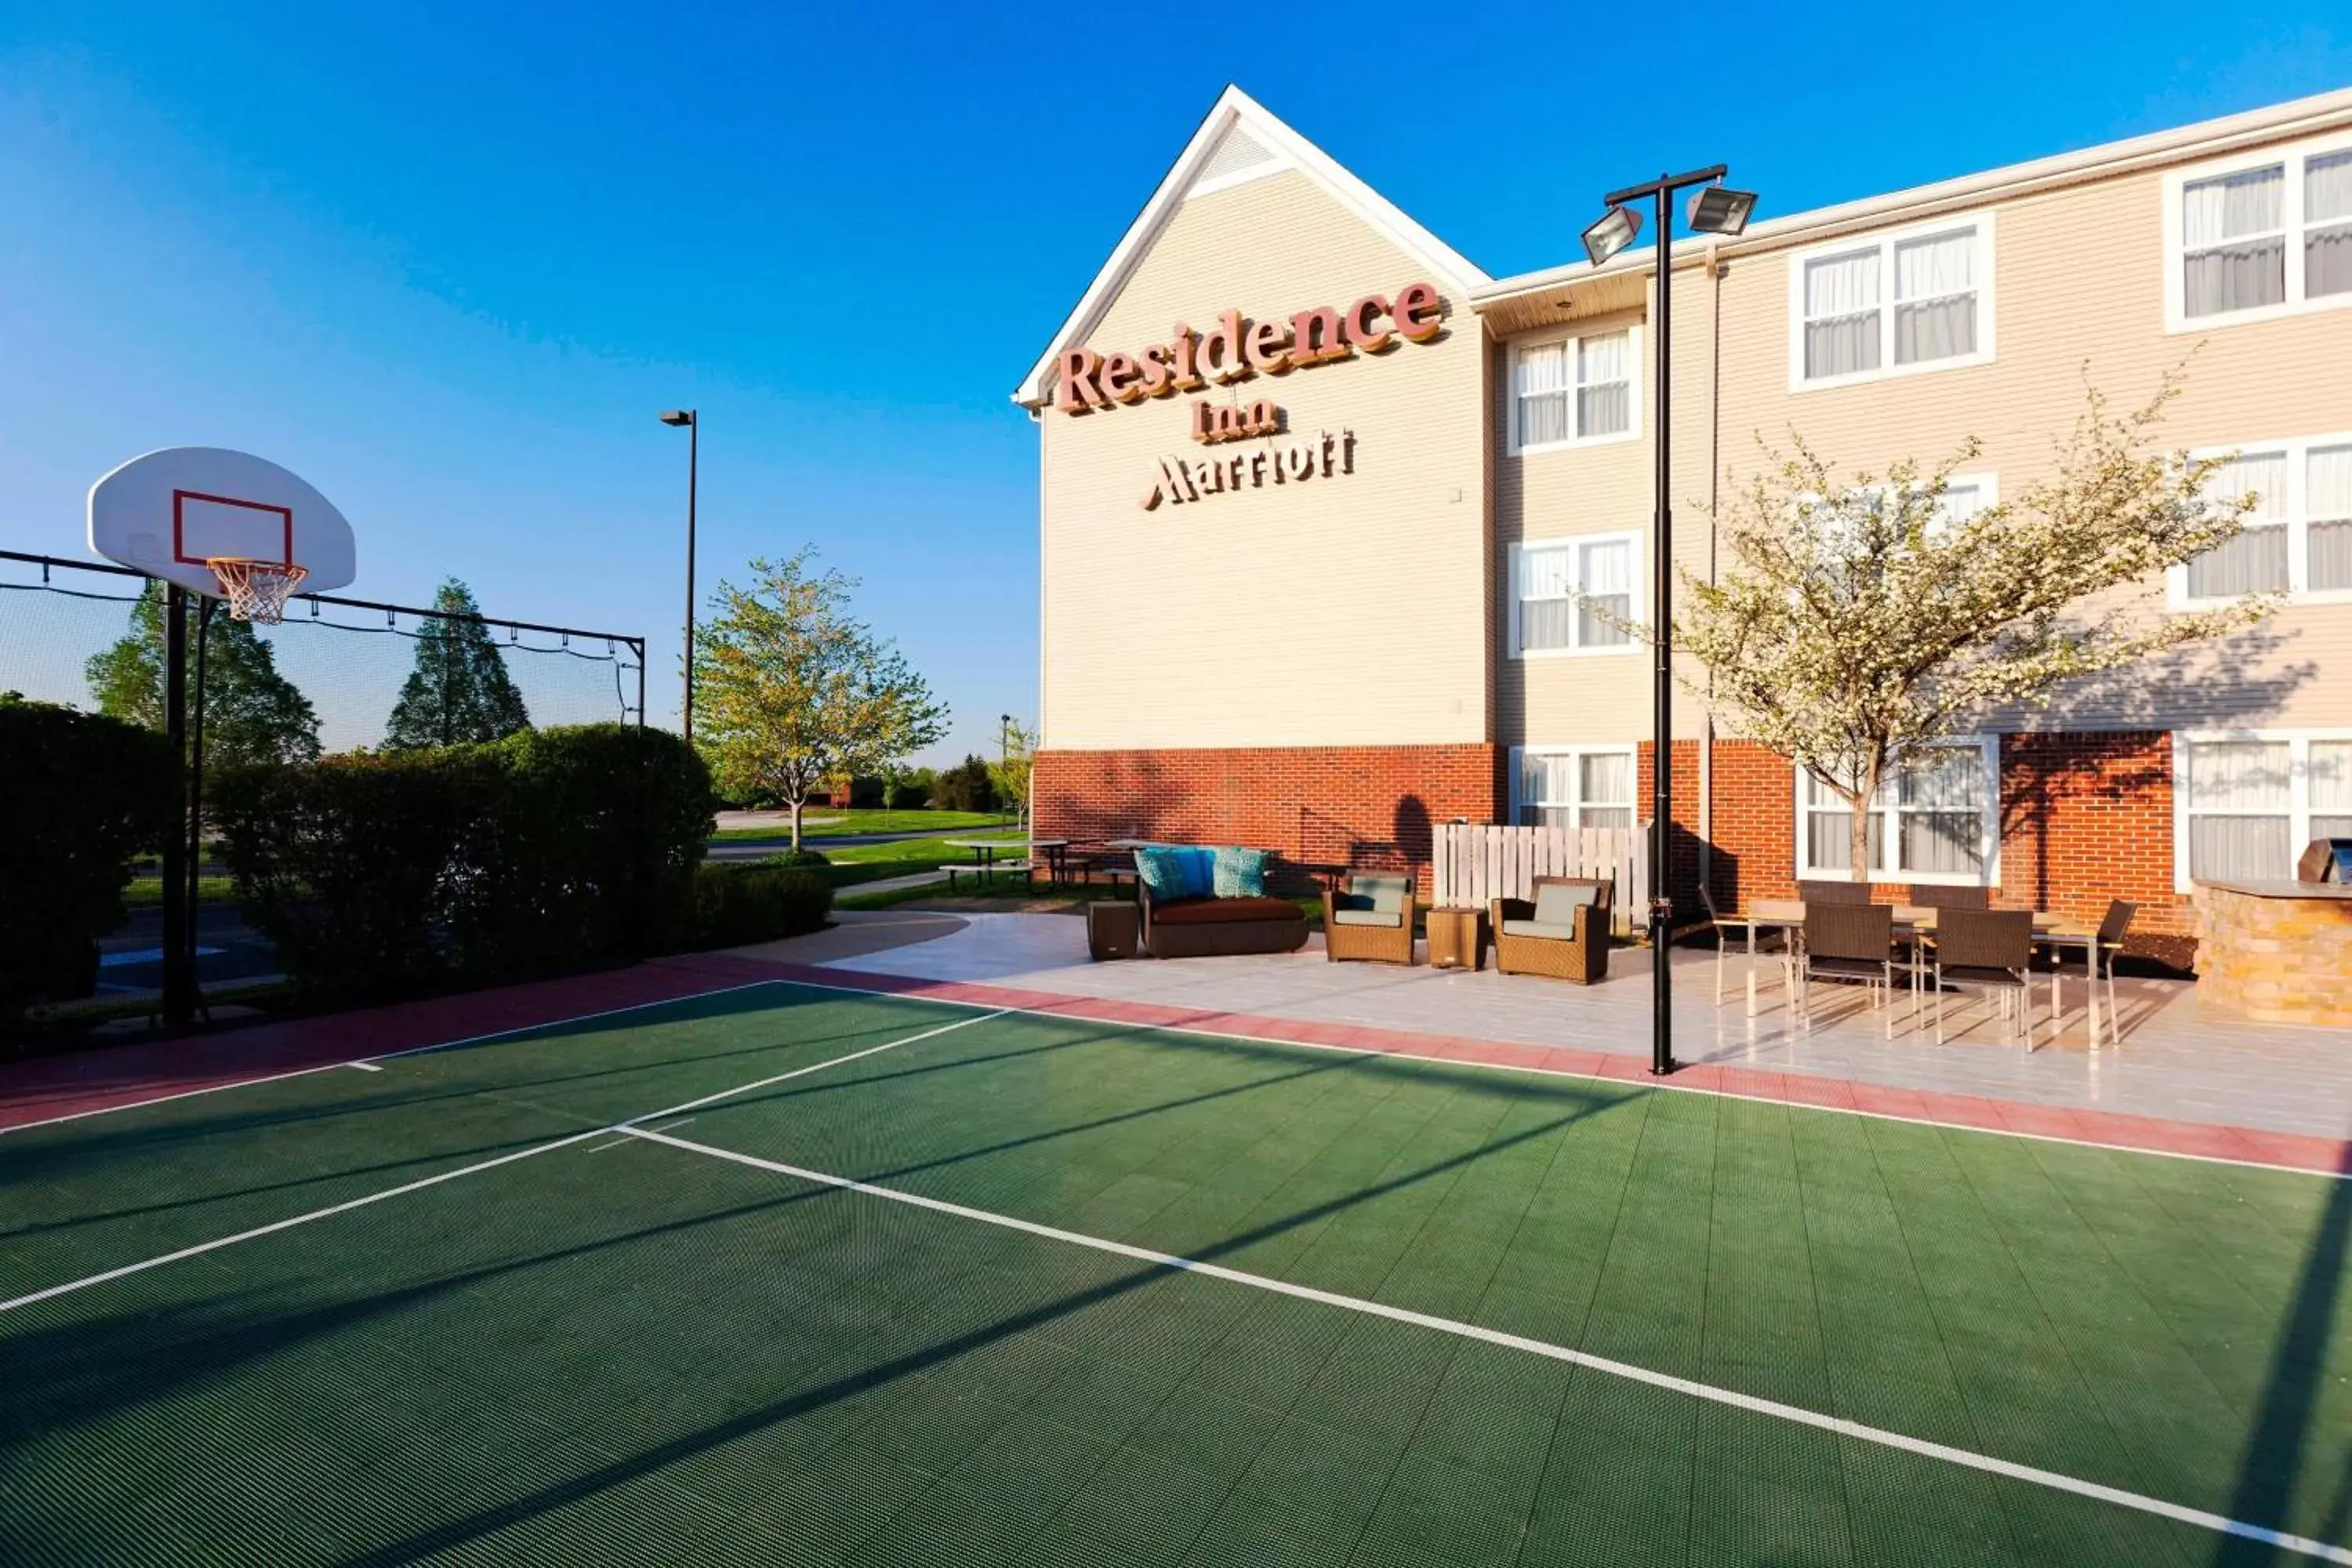 Fitness centre/facilities, Property Building in Residence Inn Indianapolis Fishers